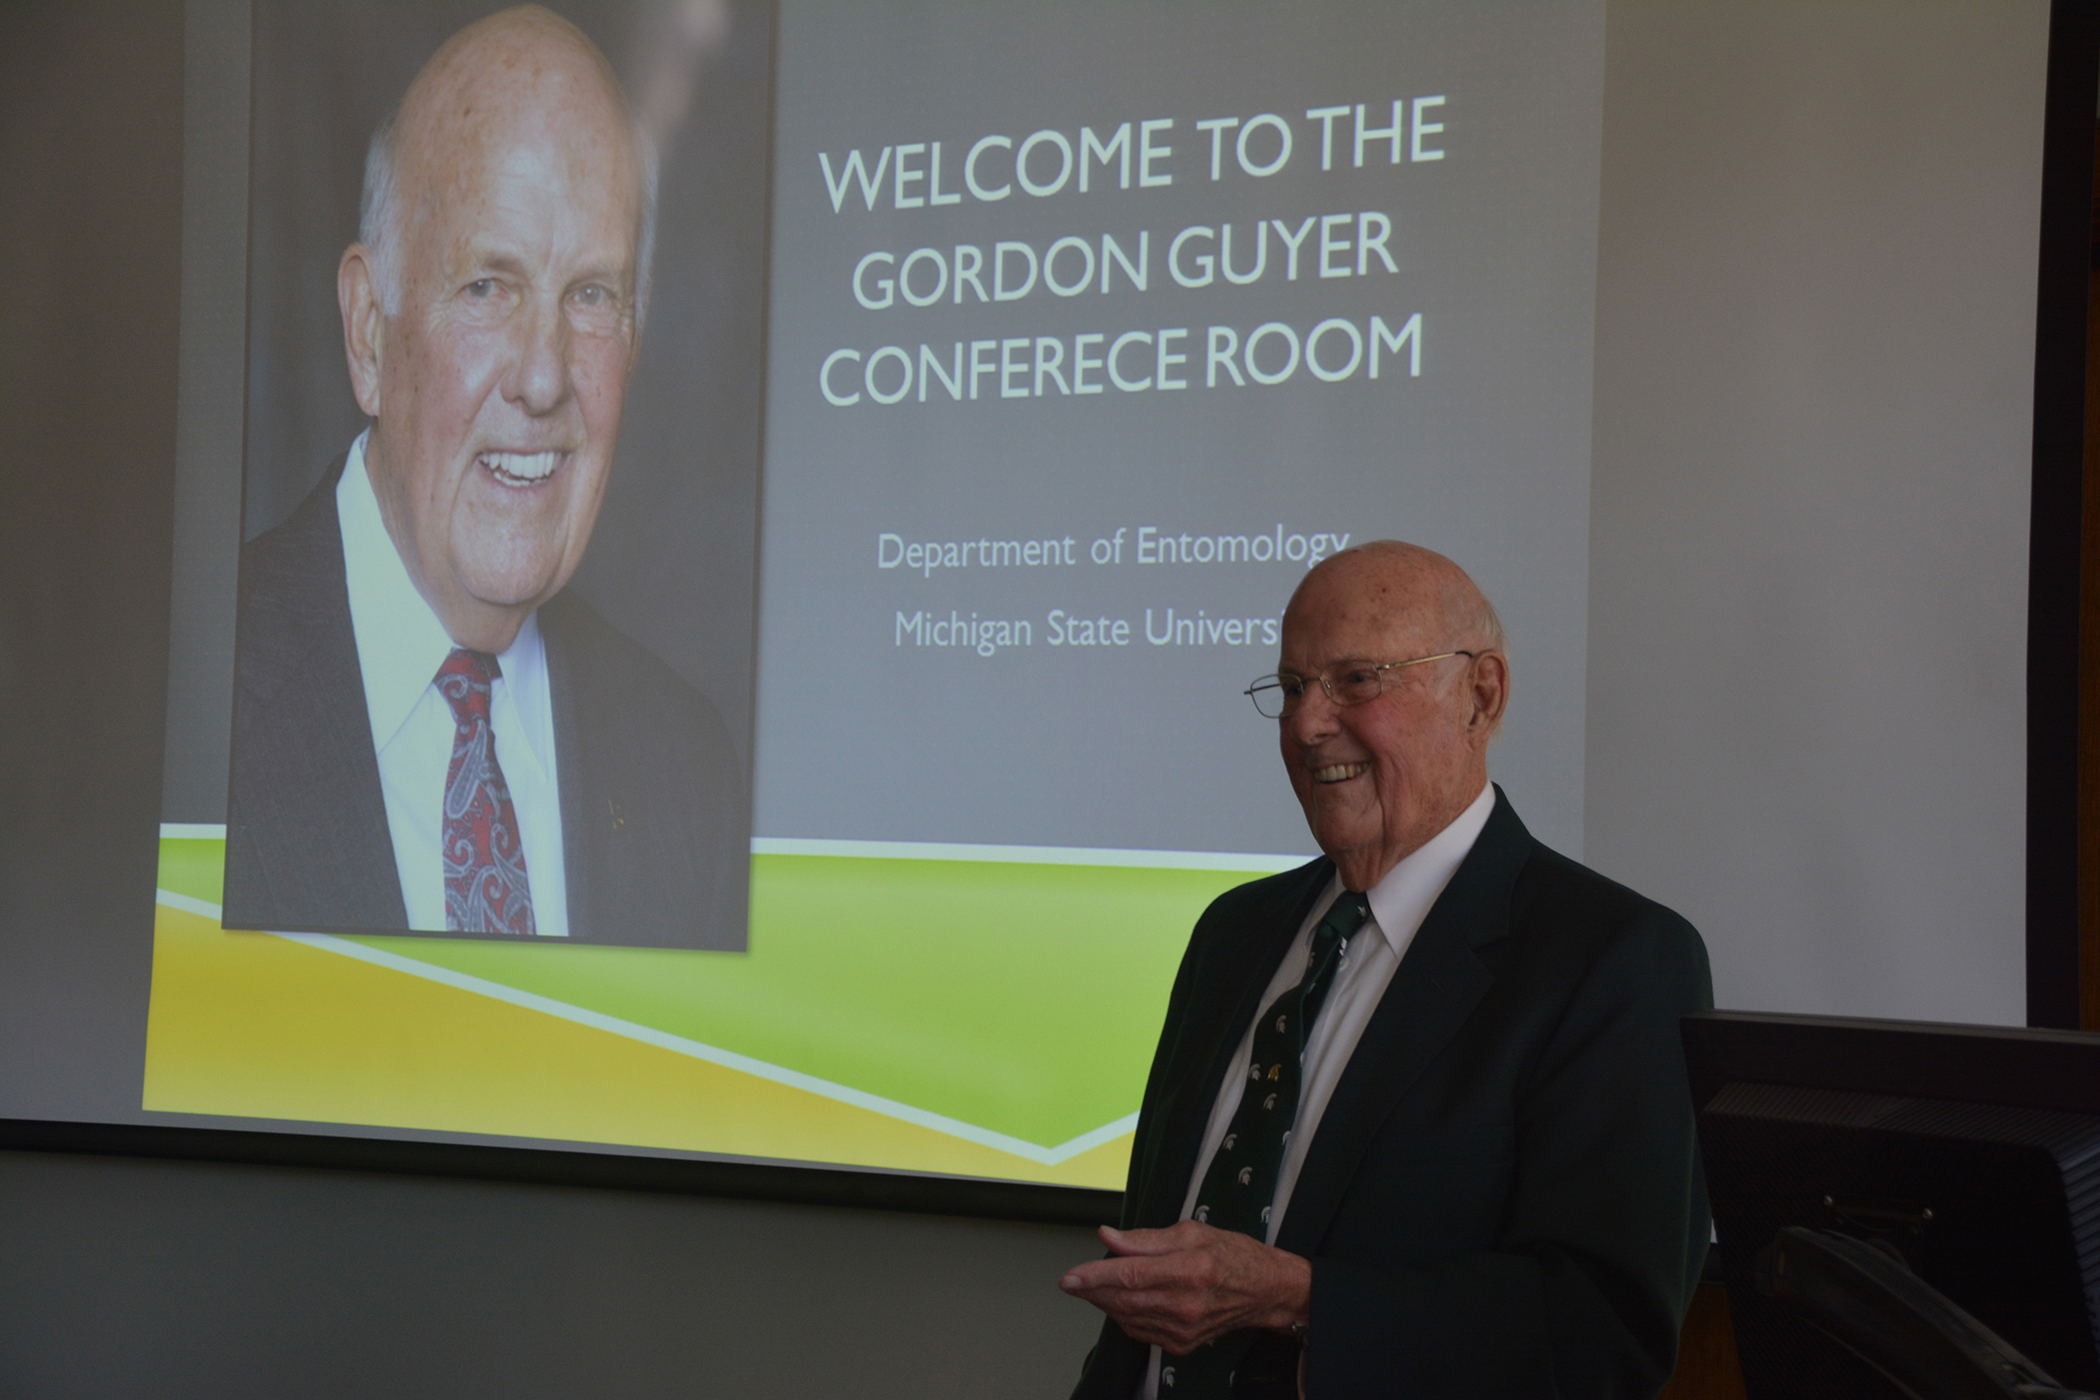 Guyer addresses the audience at the dedication of a conference room named in his honor at the MSU Department of Entomology on Nov. 2, 2014.